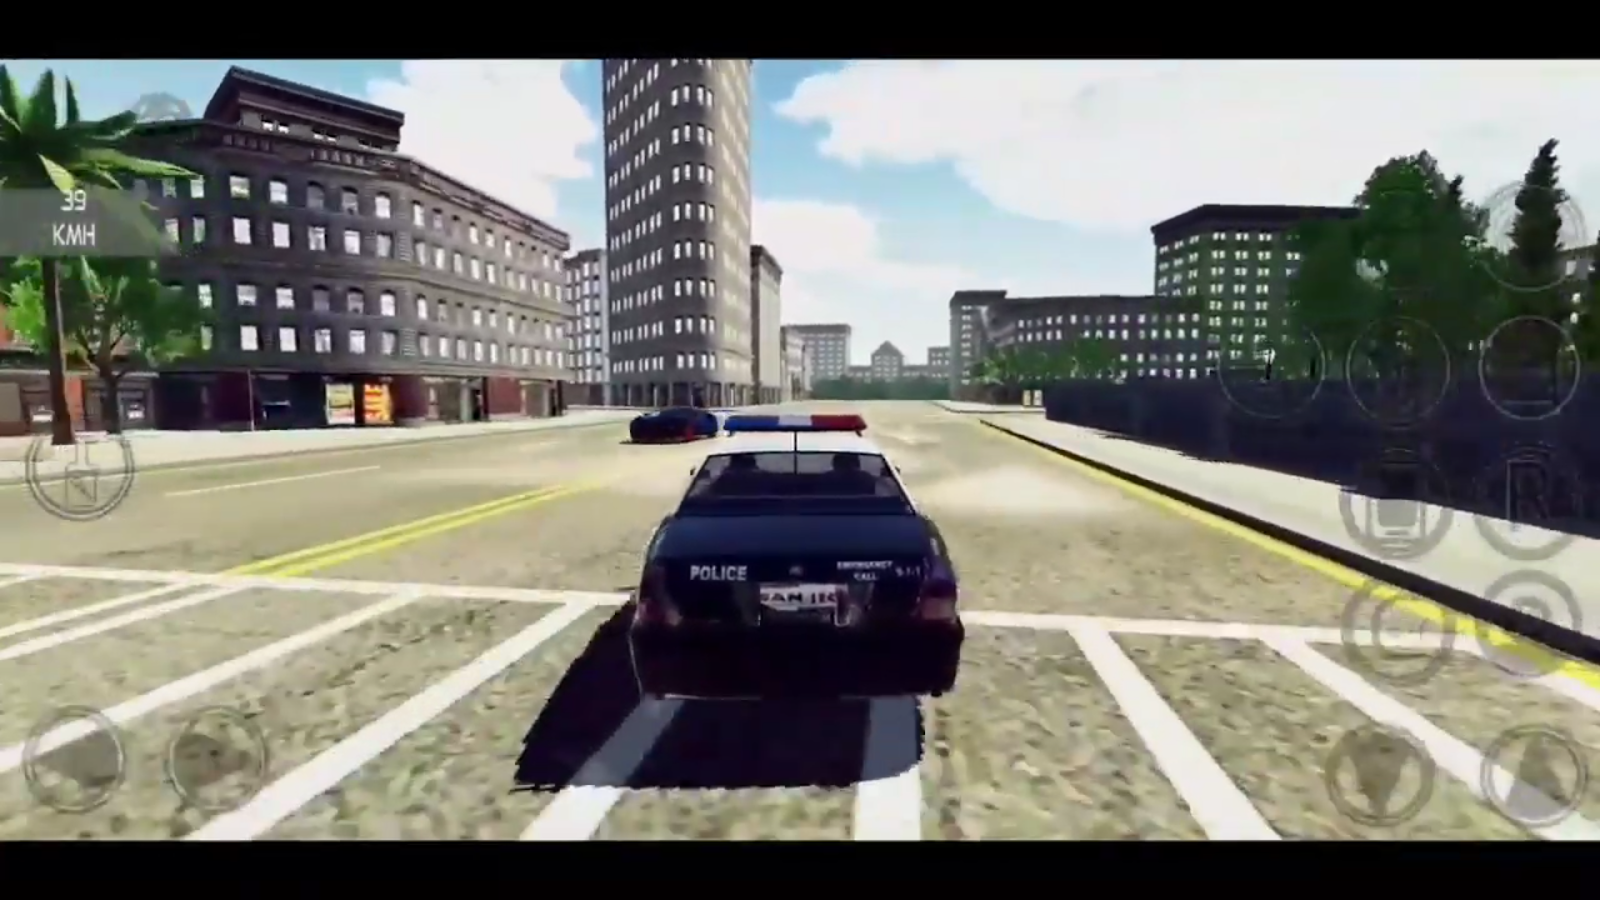 grand theft auto 5 download android apk